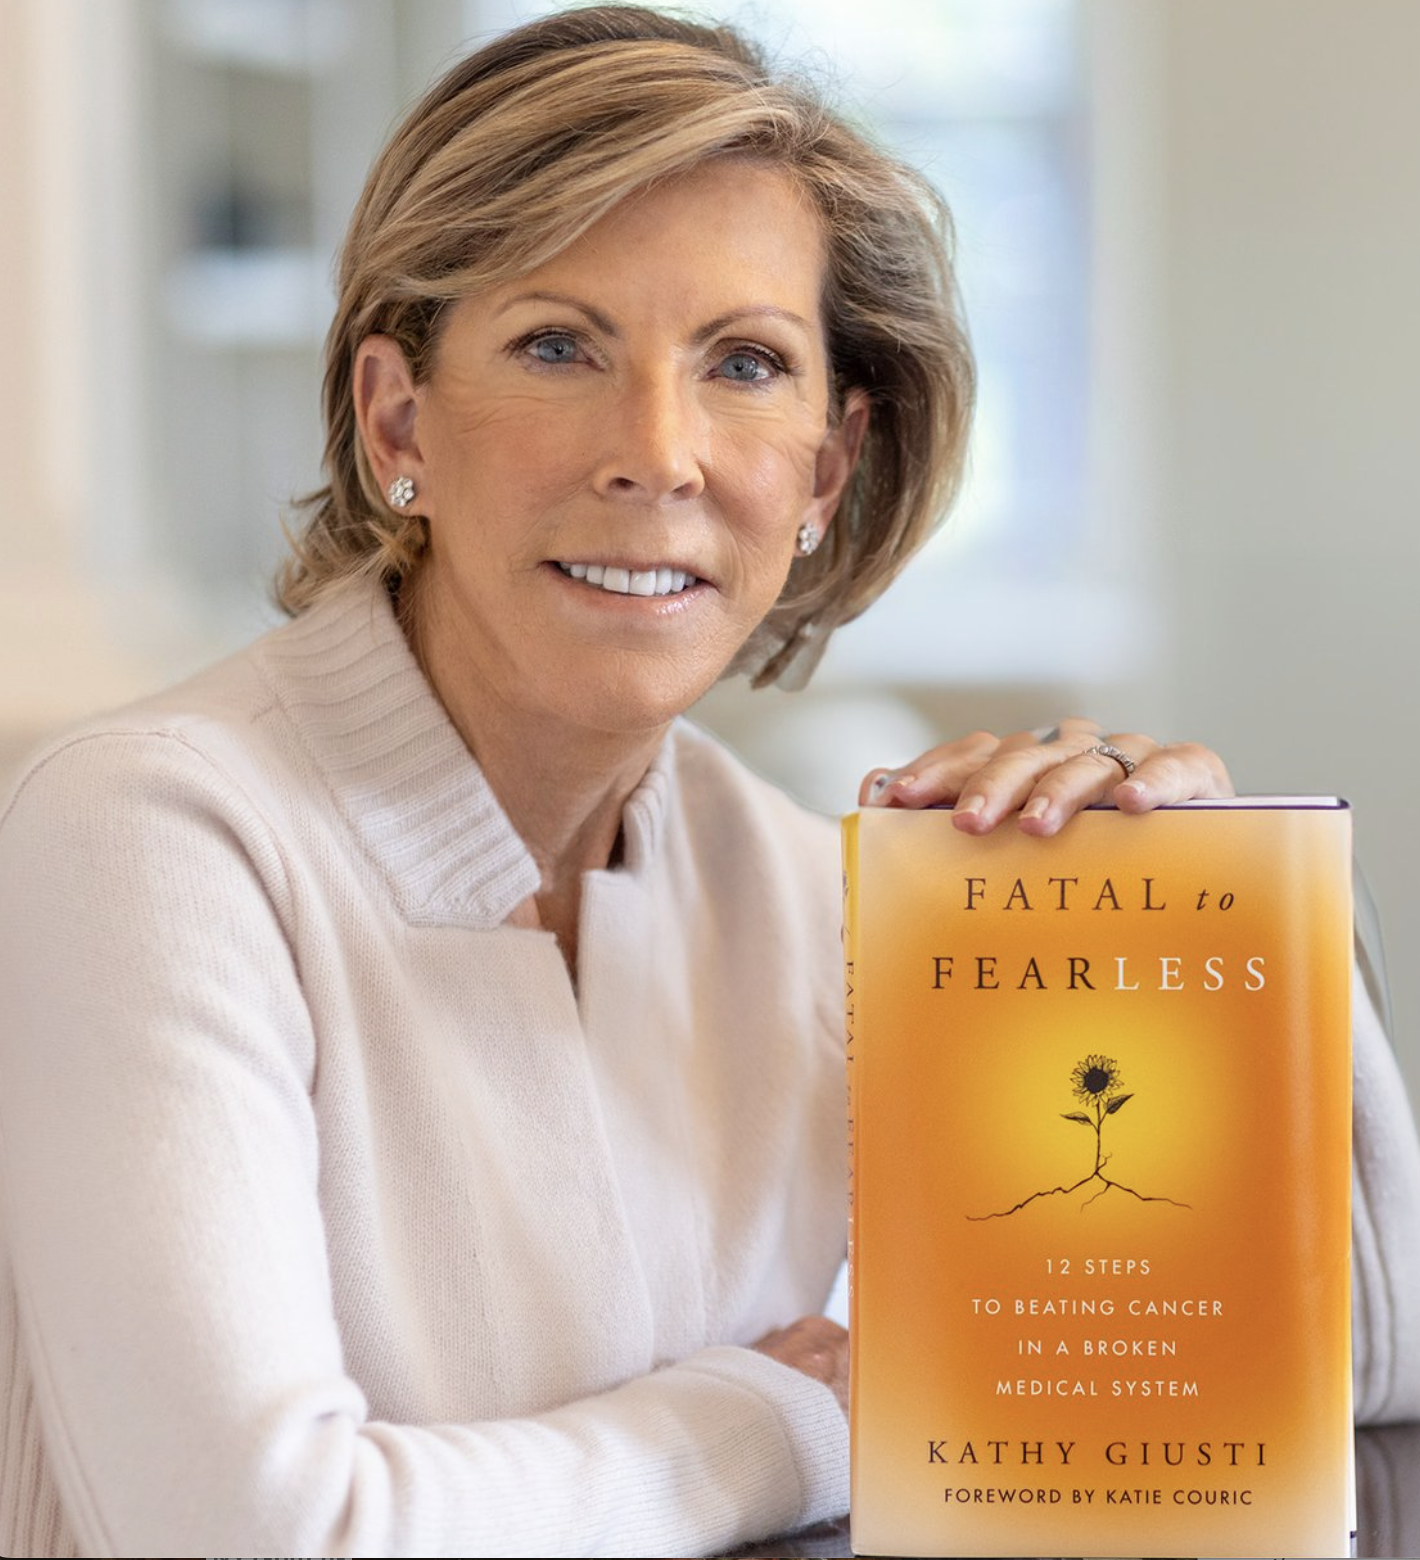 Kathy G holding Fatal to Fearless